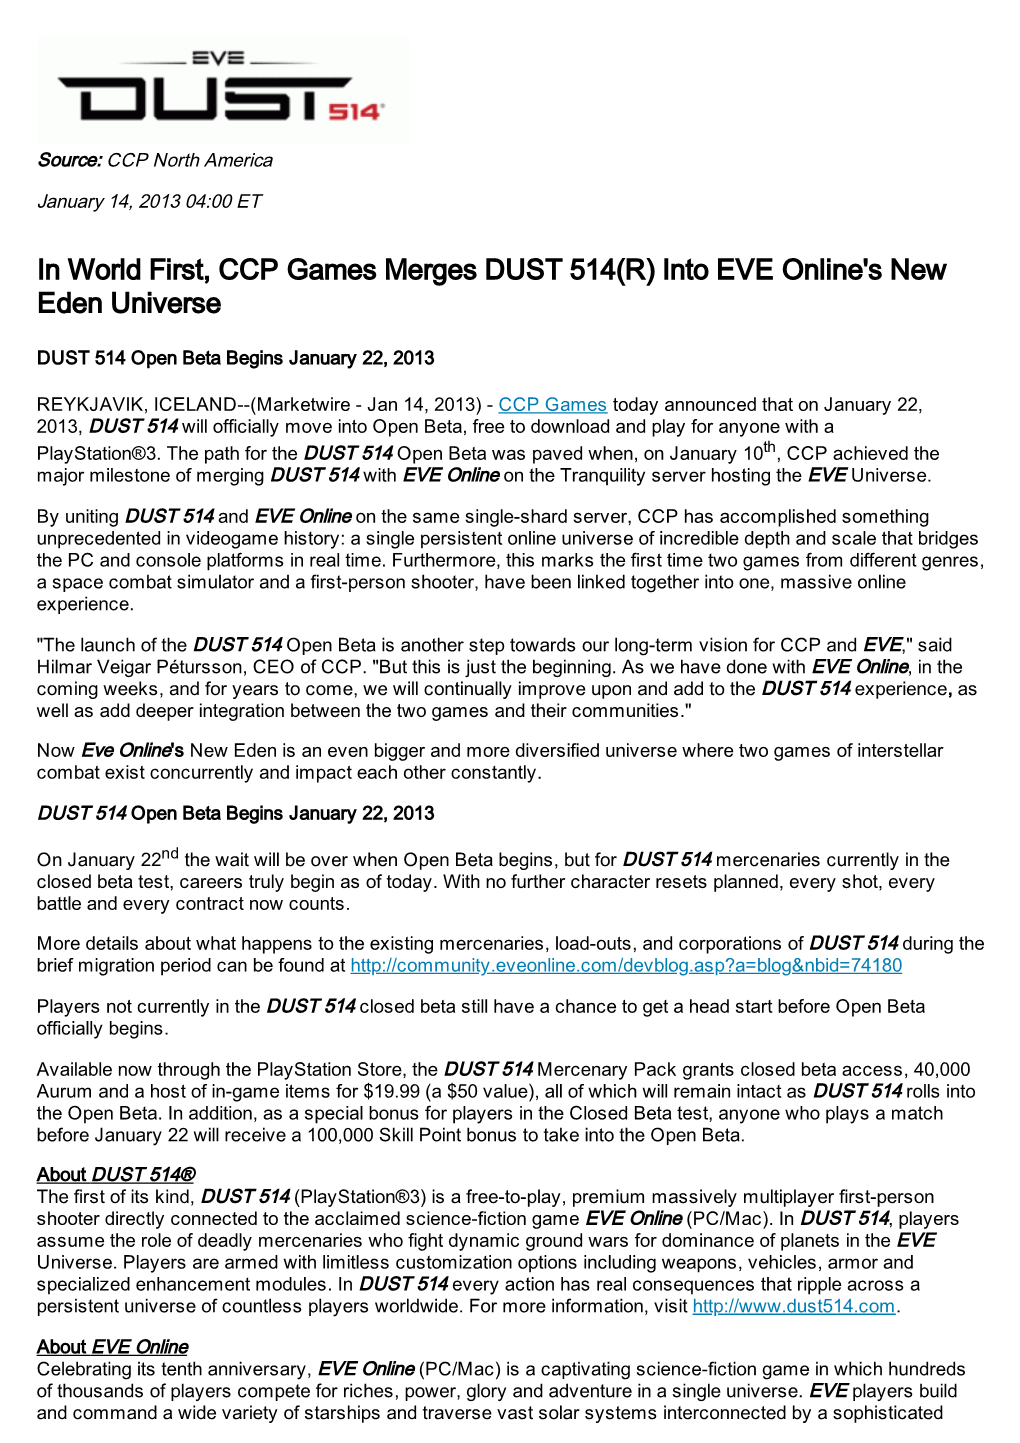 In World First, CCP Games Merges DUST 514(R) Into EVE Online's New Eden Universe